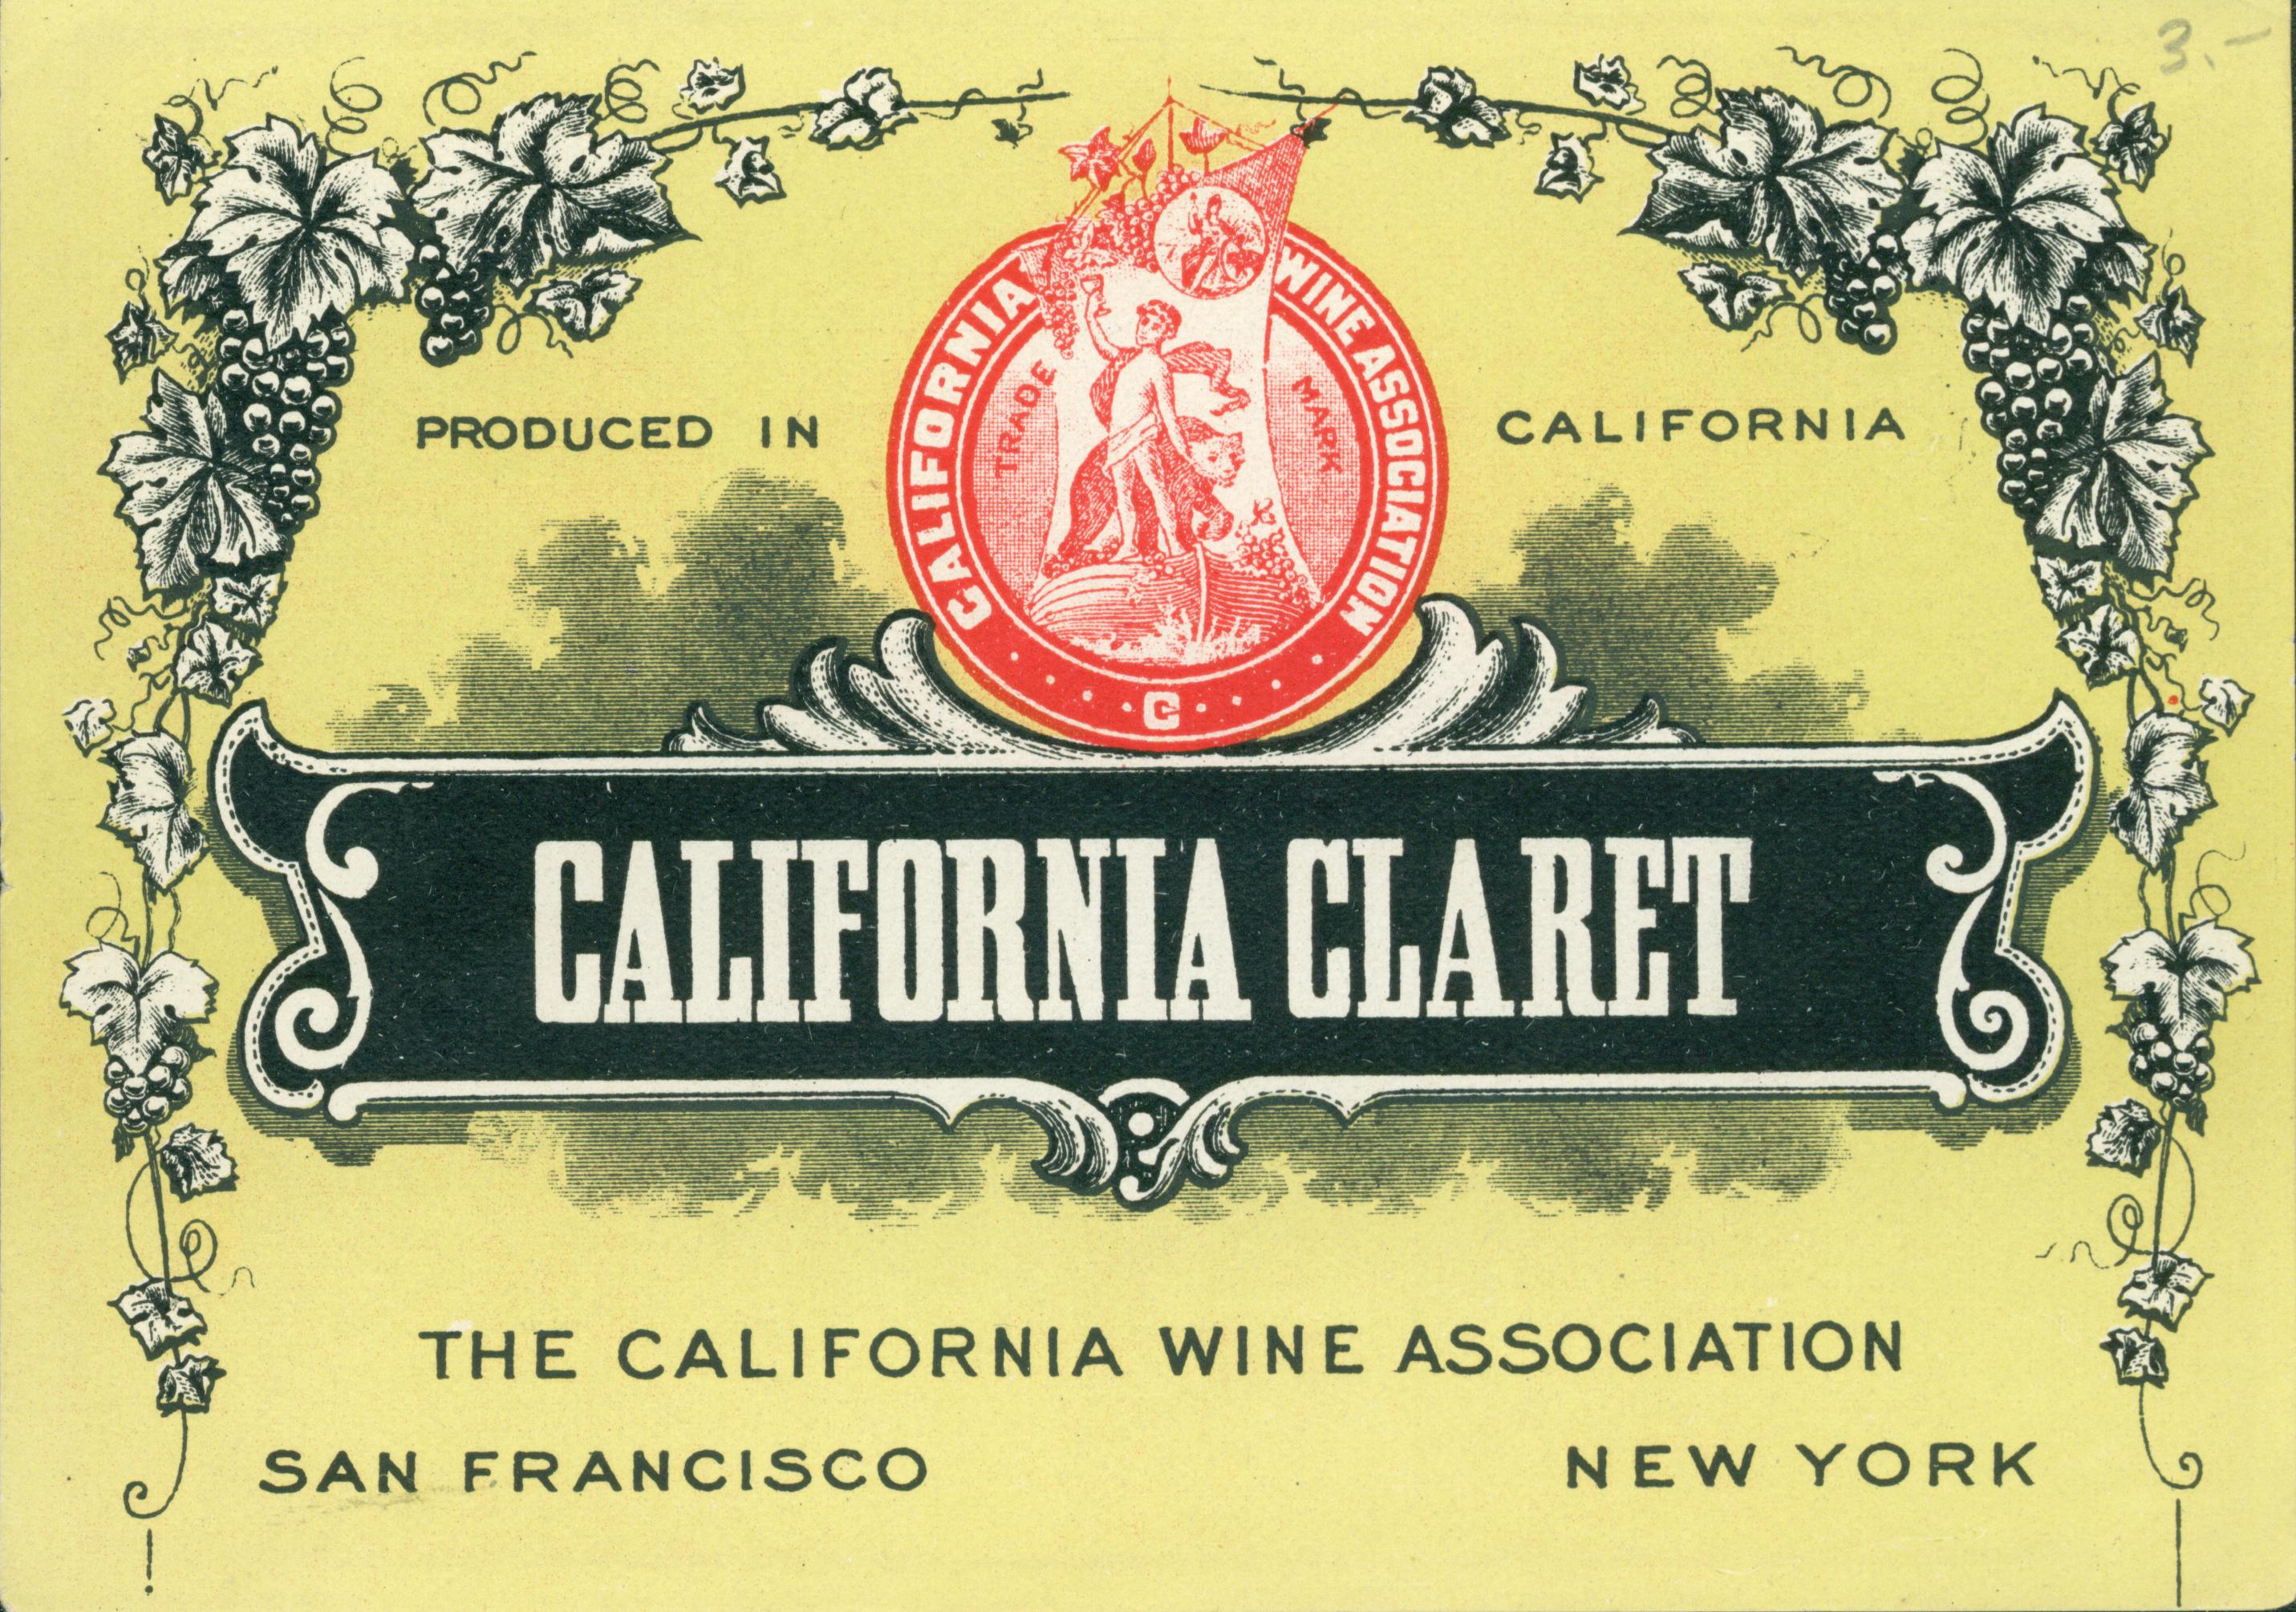 This wine label shows a vignette of a youth holding a wine glass aloft while he rests his hand on a bear. There is an outer border of vines and grapes.